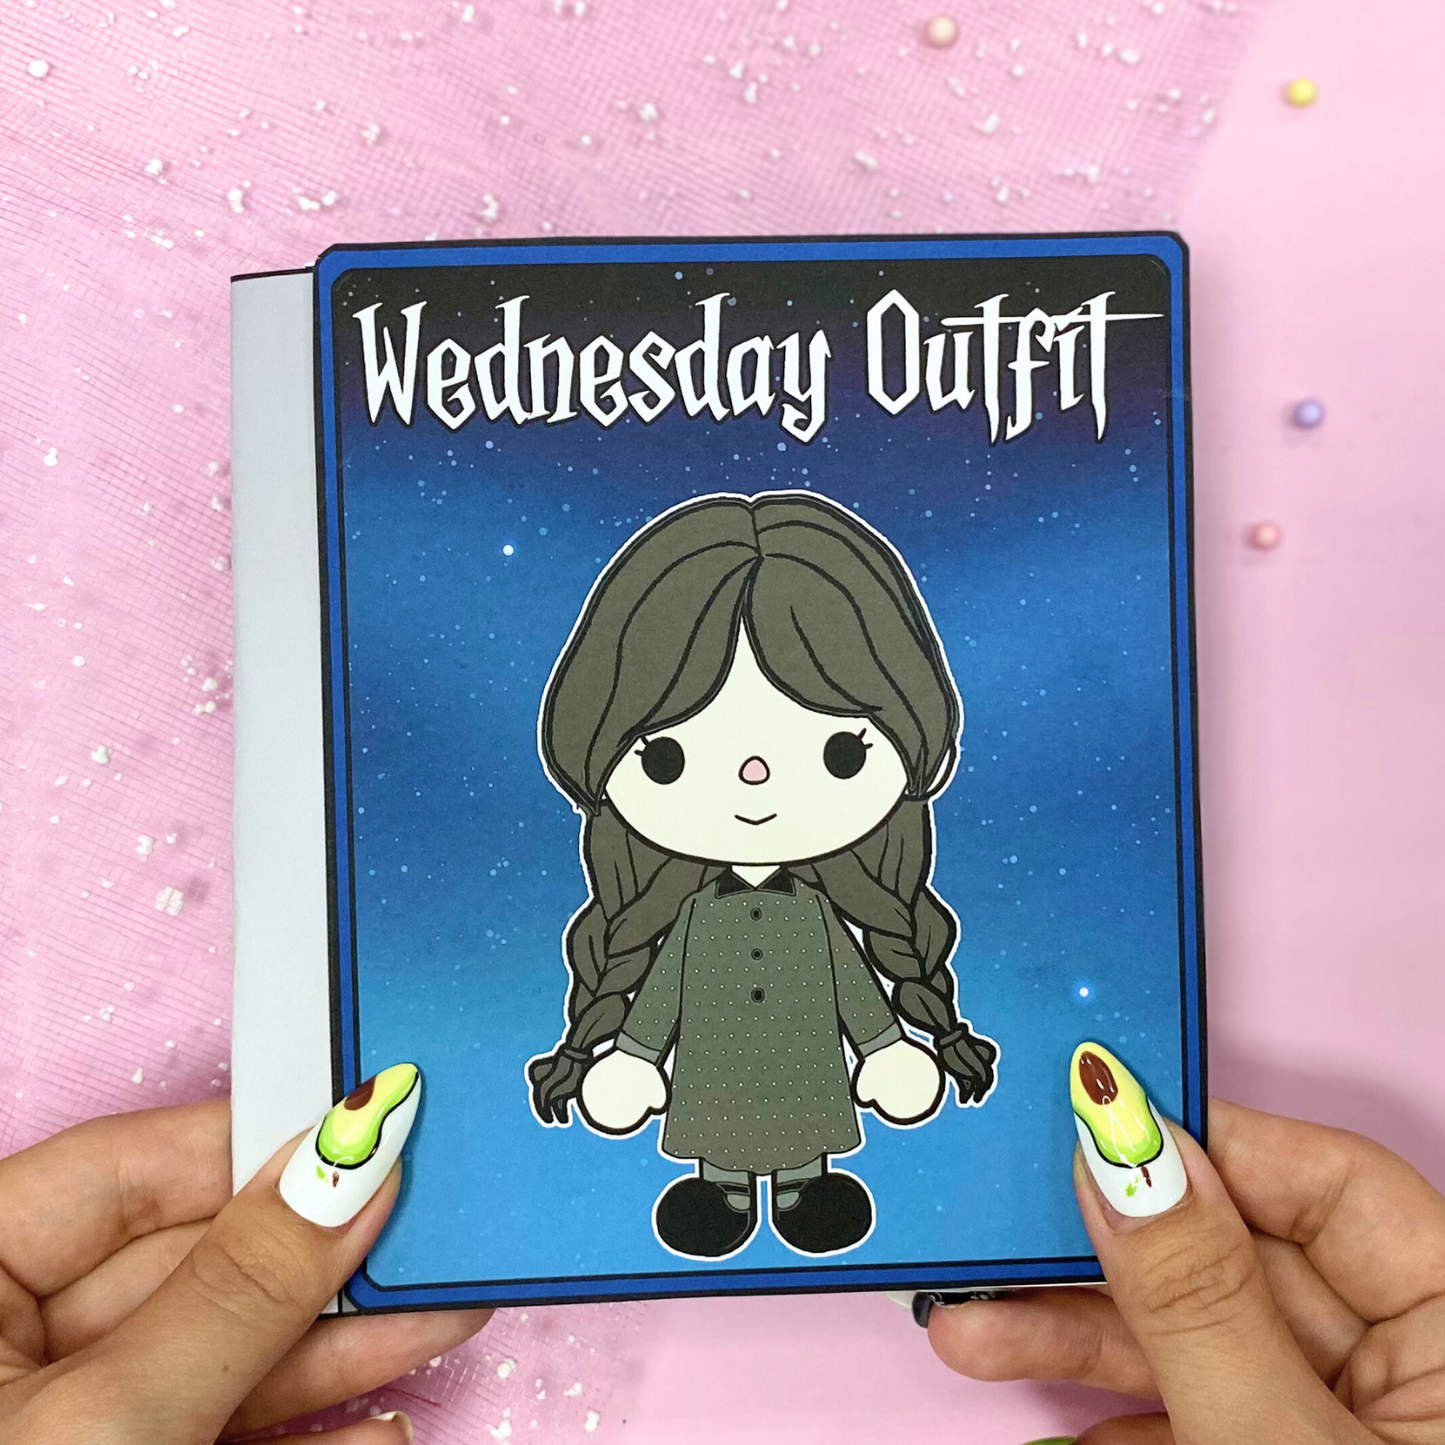 Cute toca Wednesday wardrobe 🌈 Activities book printable | Printable Gothic Dollhouse Busy book | Buy 1 Get 1 Free 🌈 Woa Doll Crafts